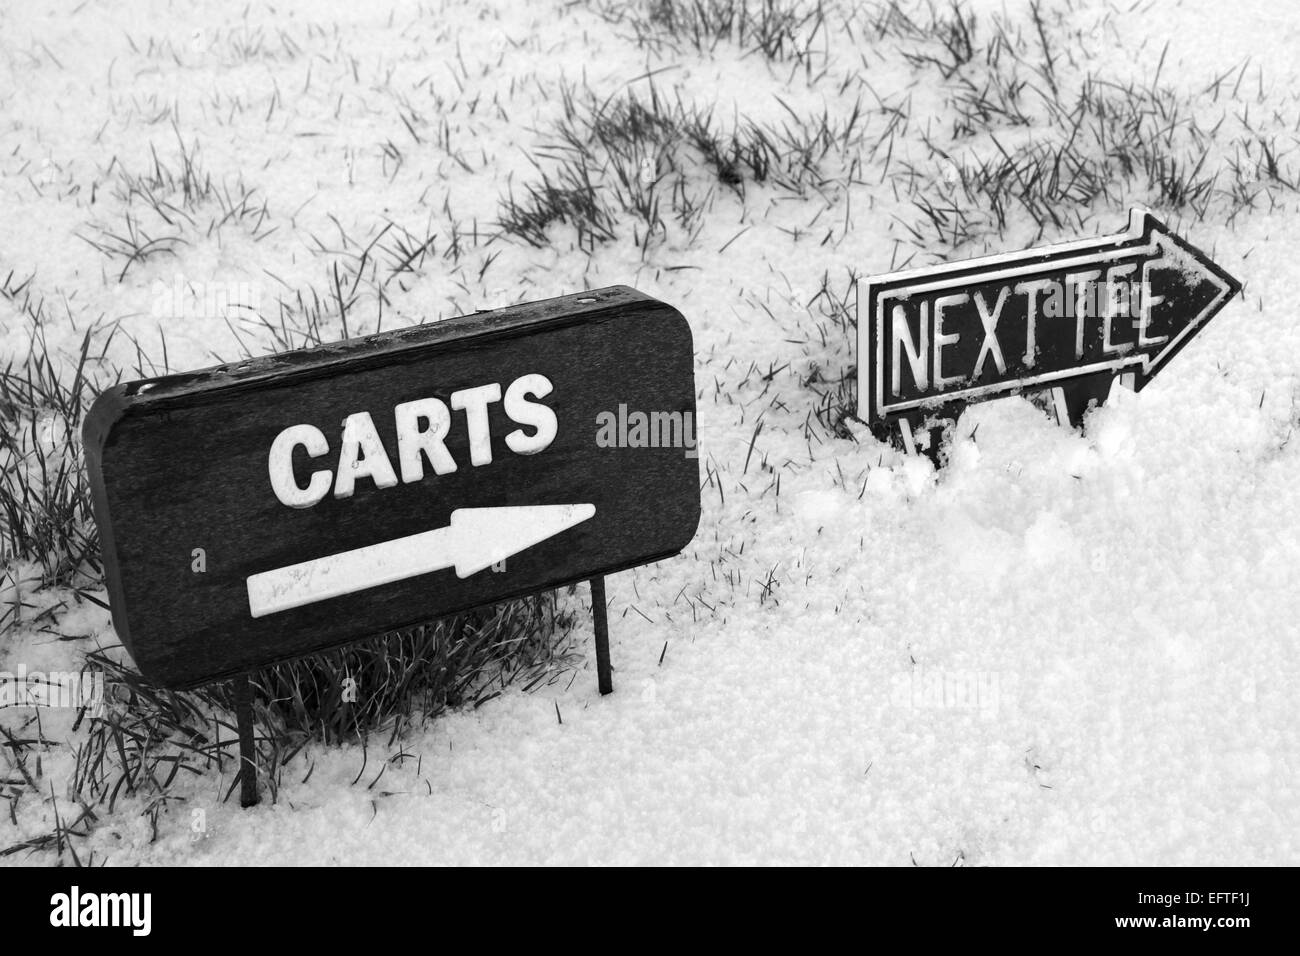 carts and next tee sign on a snow covered links golf course in ireland in snowy winter weather Stock Photo